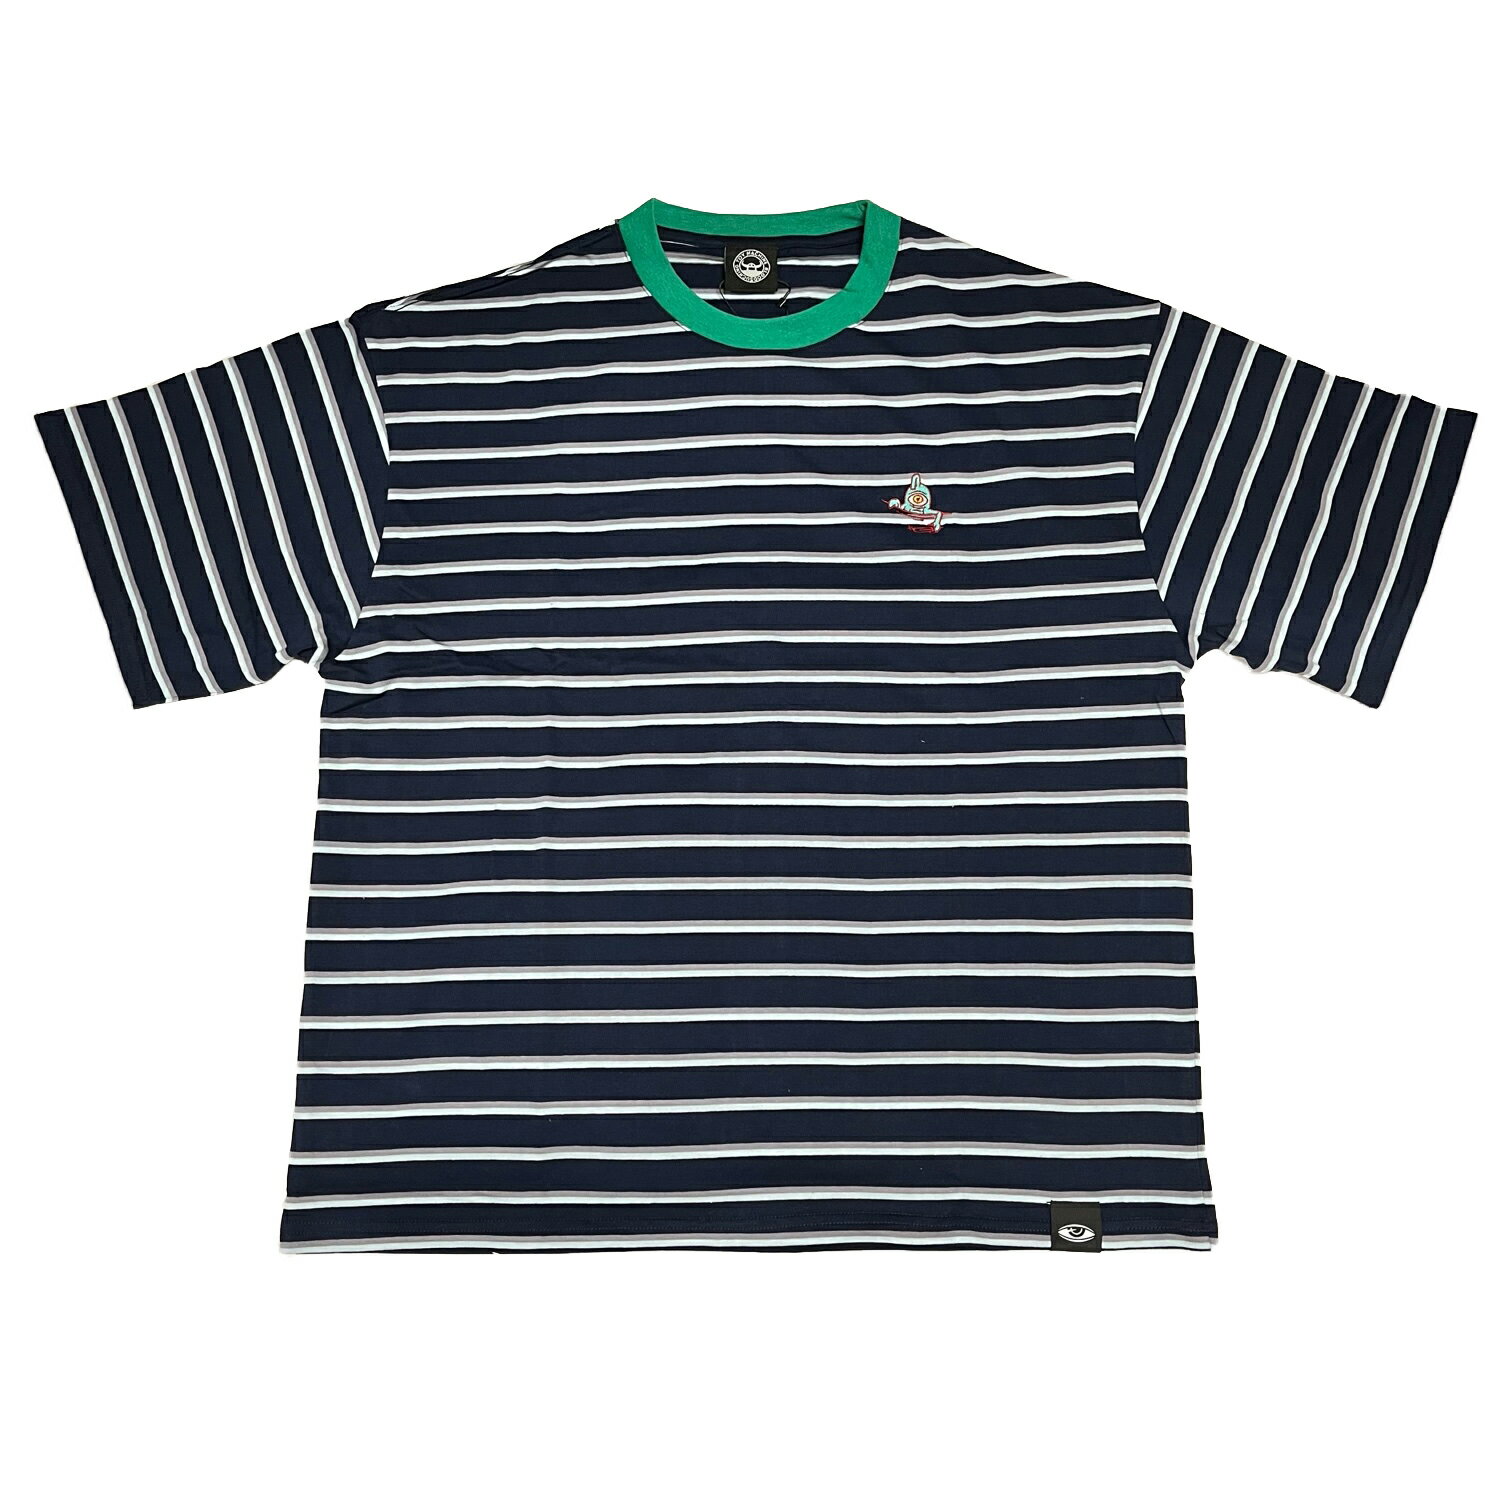 y TOYMACHINE / SECT EMBROIDERY BORDER SS TEE / NAVY z@gC}V[@gC}@TVc@@{[_[@lCr[@